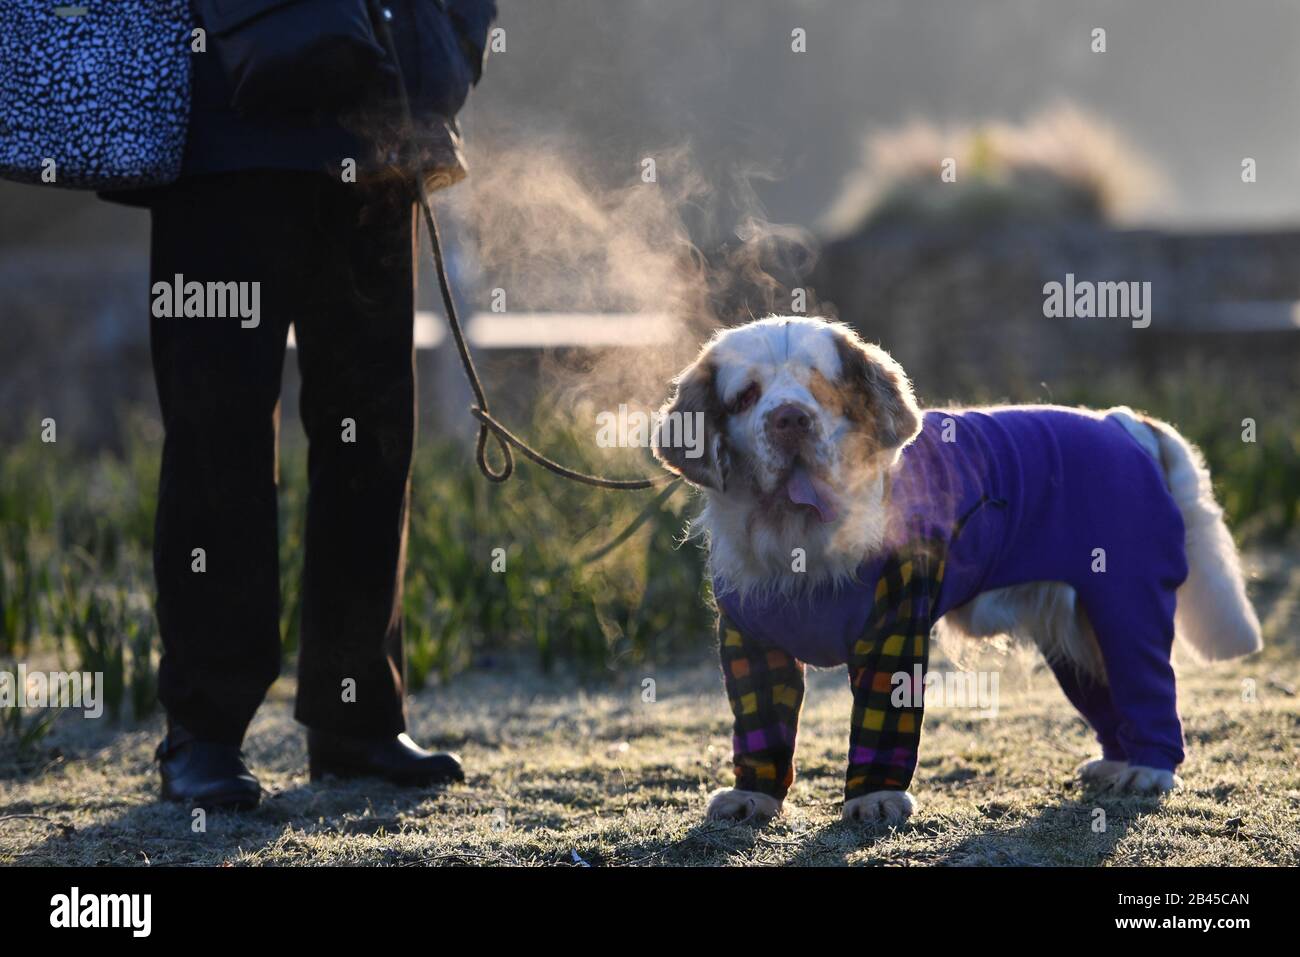 Bosun, a Clumber spaniel, arrives at the Birmingham National Exhibition Centre (NEC) for the second day of the Crufts Dog Show. Stock Photo